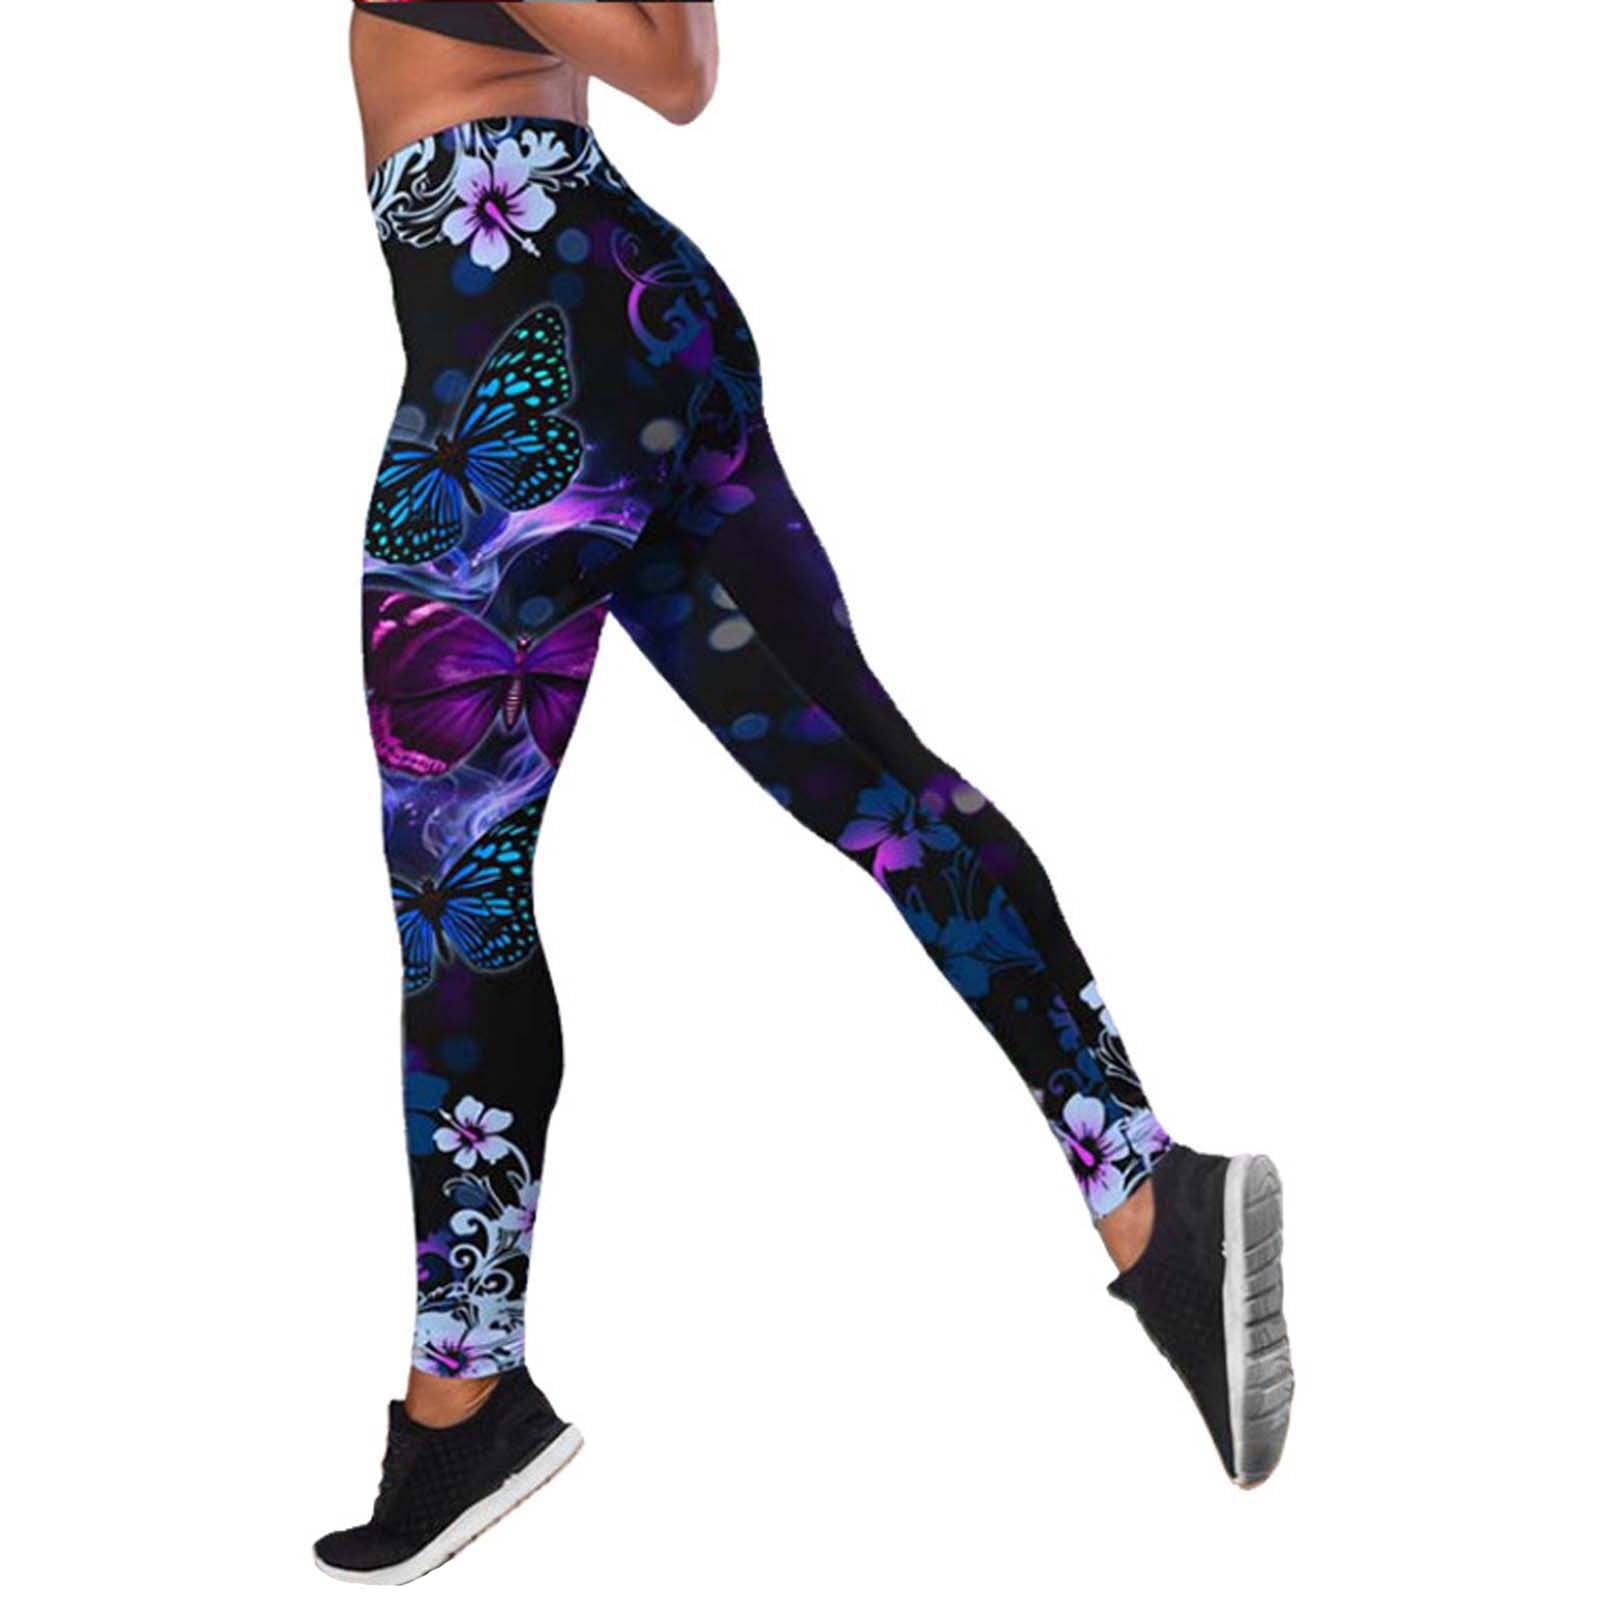 Plus Size Leggings With Pockets Abstract Art Print Yoga Workout Pants Bottoms Tights Stretchy Buttery Soft Spandex Polyester Legging